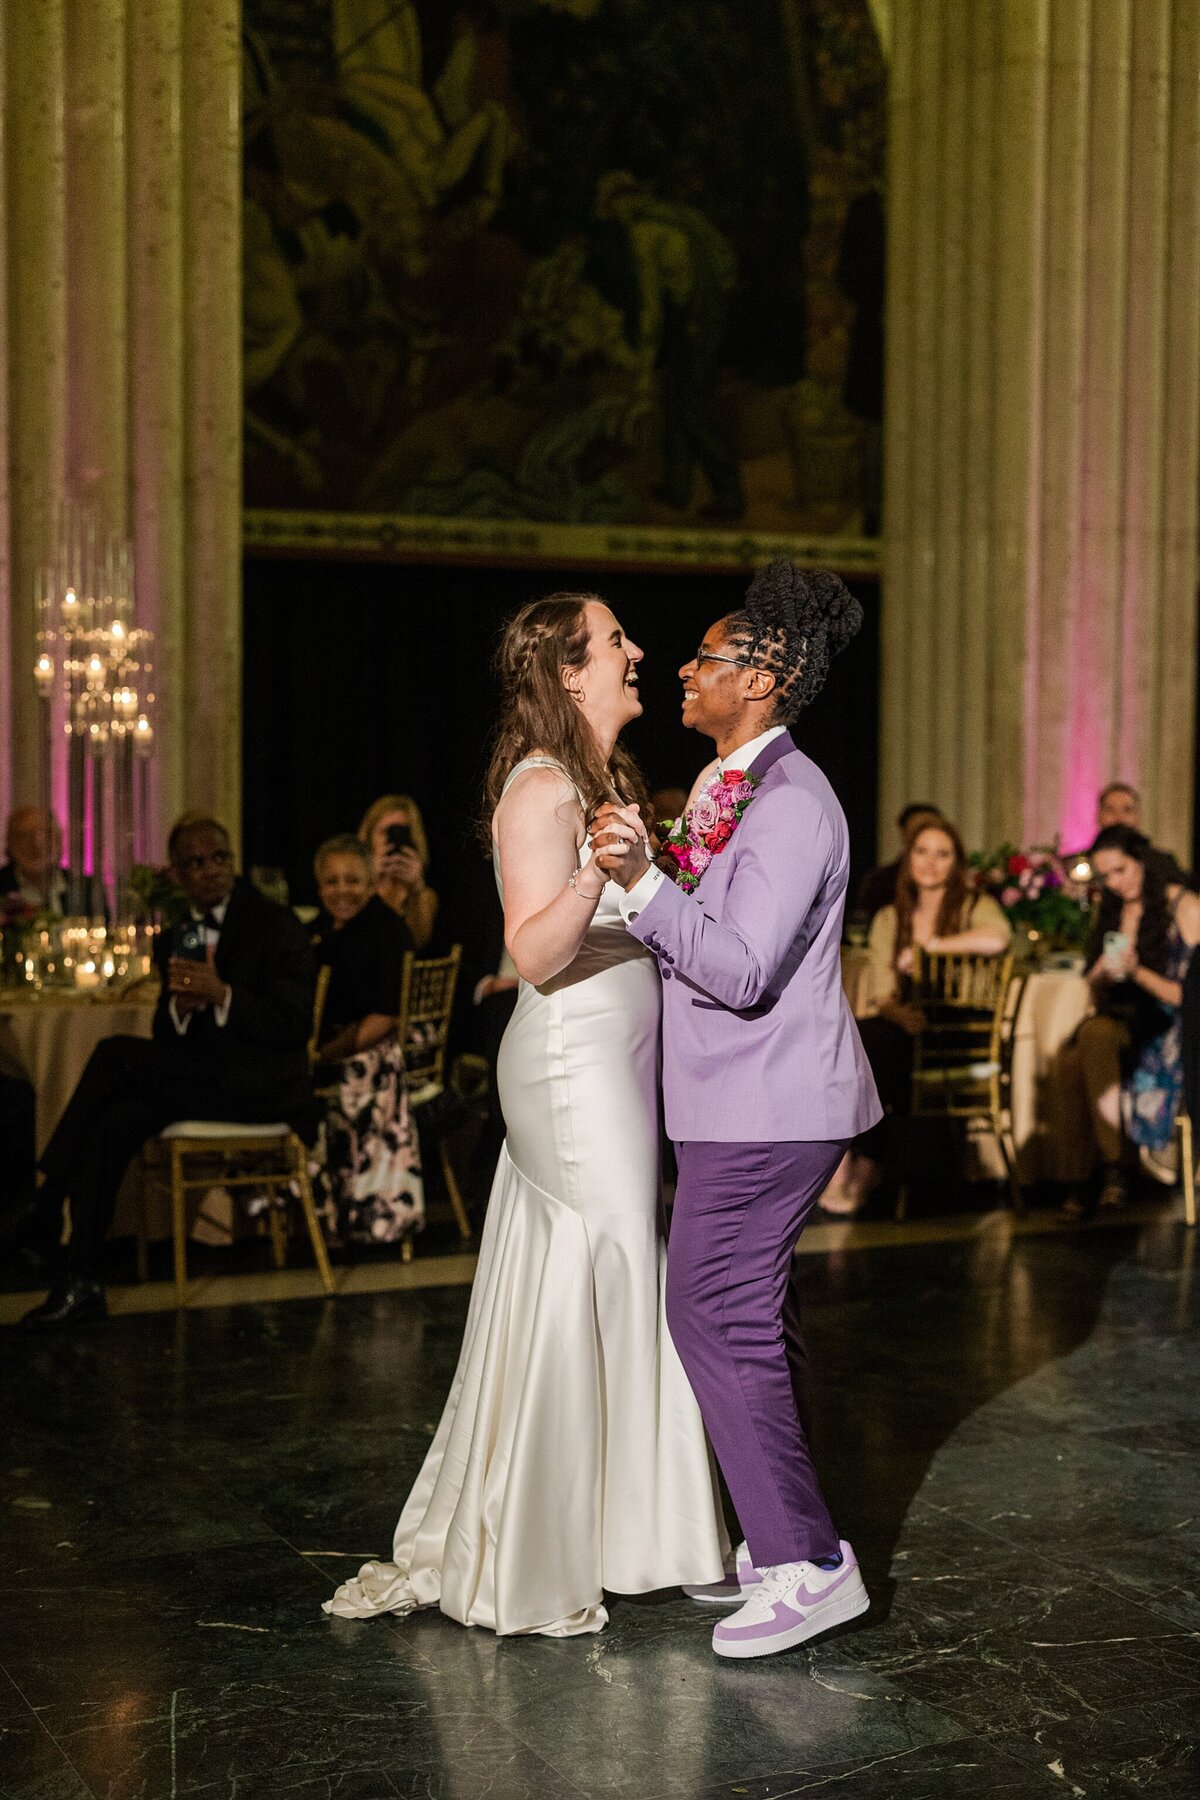 A candid photo of two brides happily sharing their first dance during their wedding reception at The Hall of State in Fair Park in Dallas, Texas. The bride on the left is wearing a long, white dress while the bride on the right wearing a purple suit with an large, intricate boutonniere and purple sneakers. Wedding guests can be seen watching intently from their tables in the background.